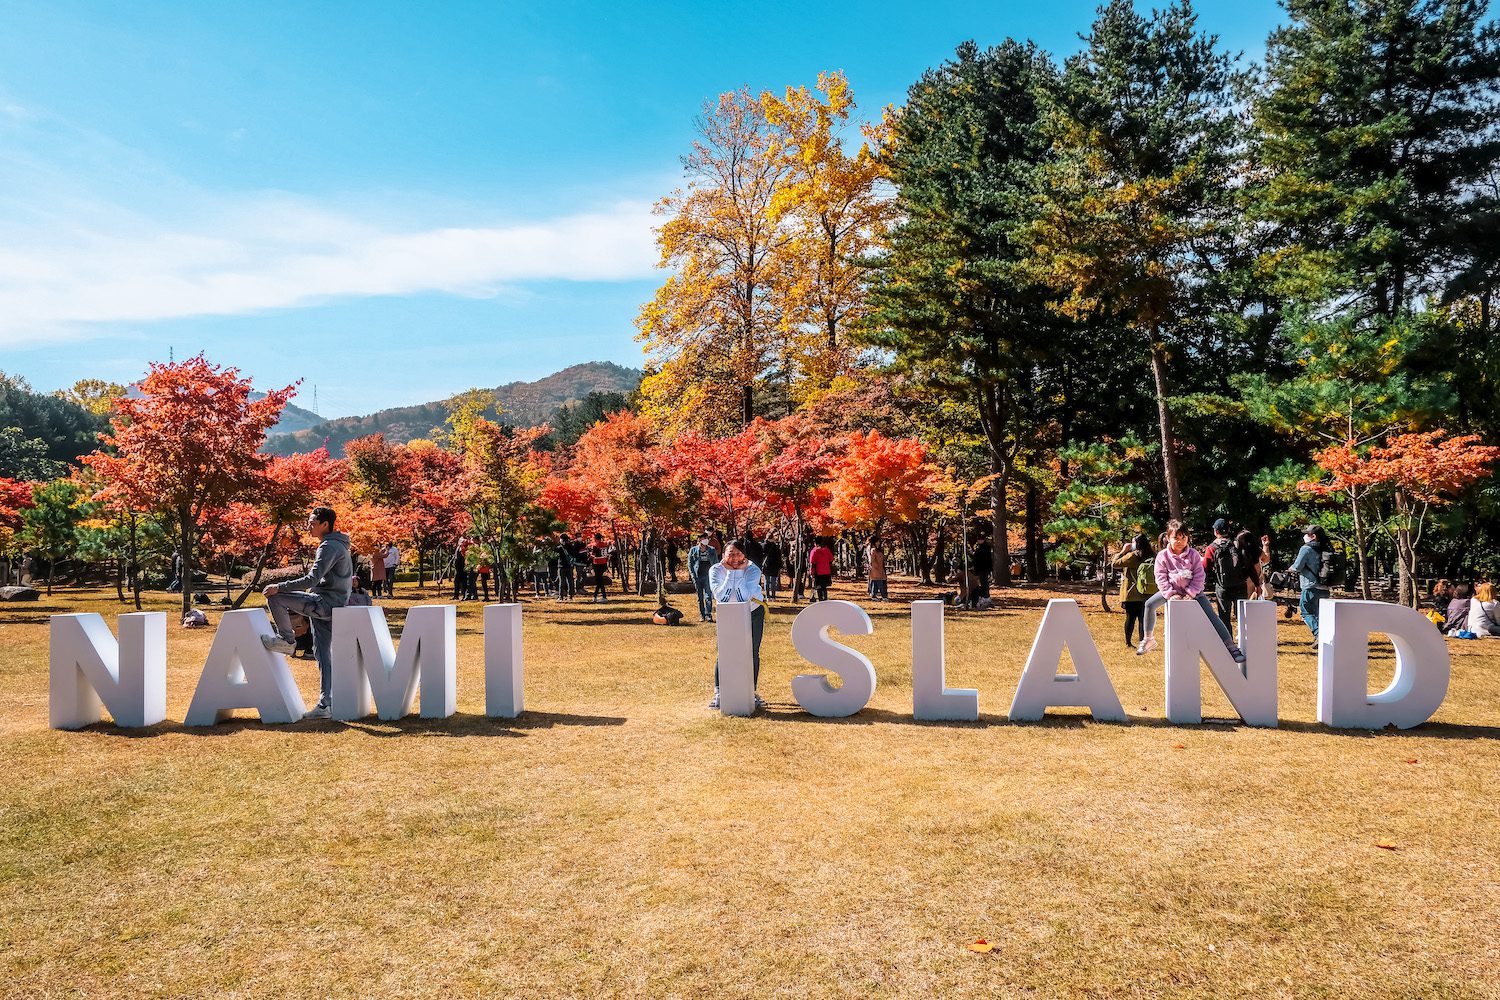 nami island sign with autumn foliage in the background